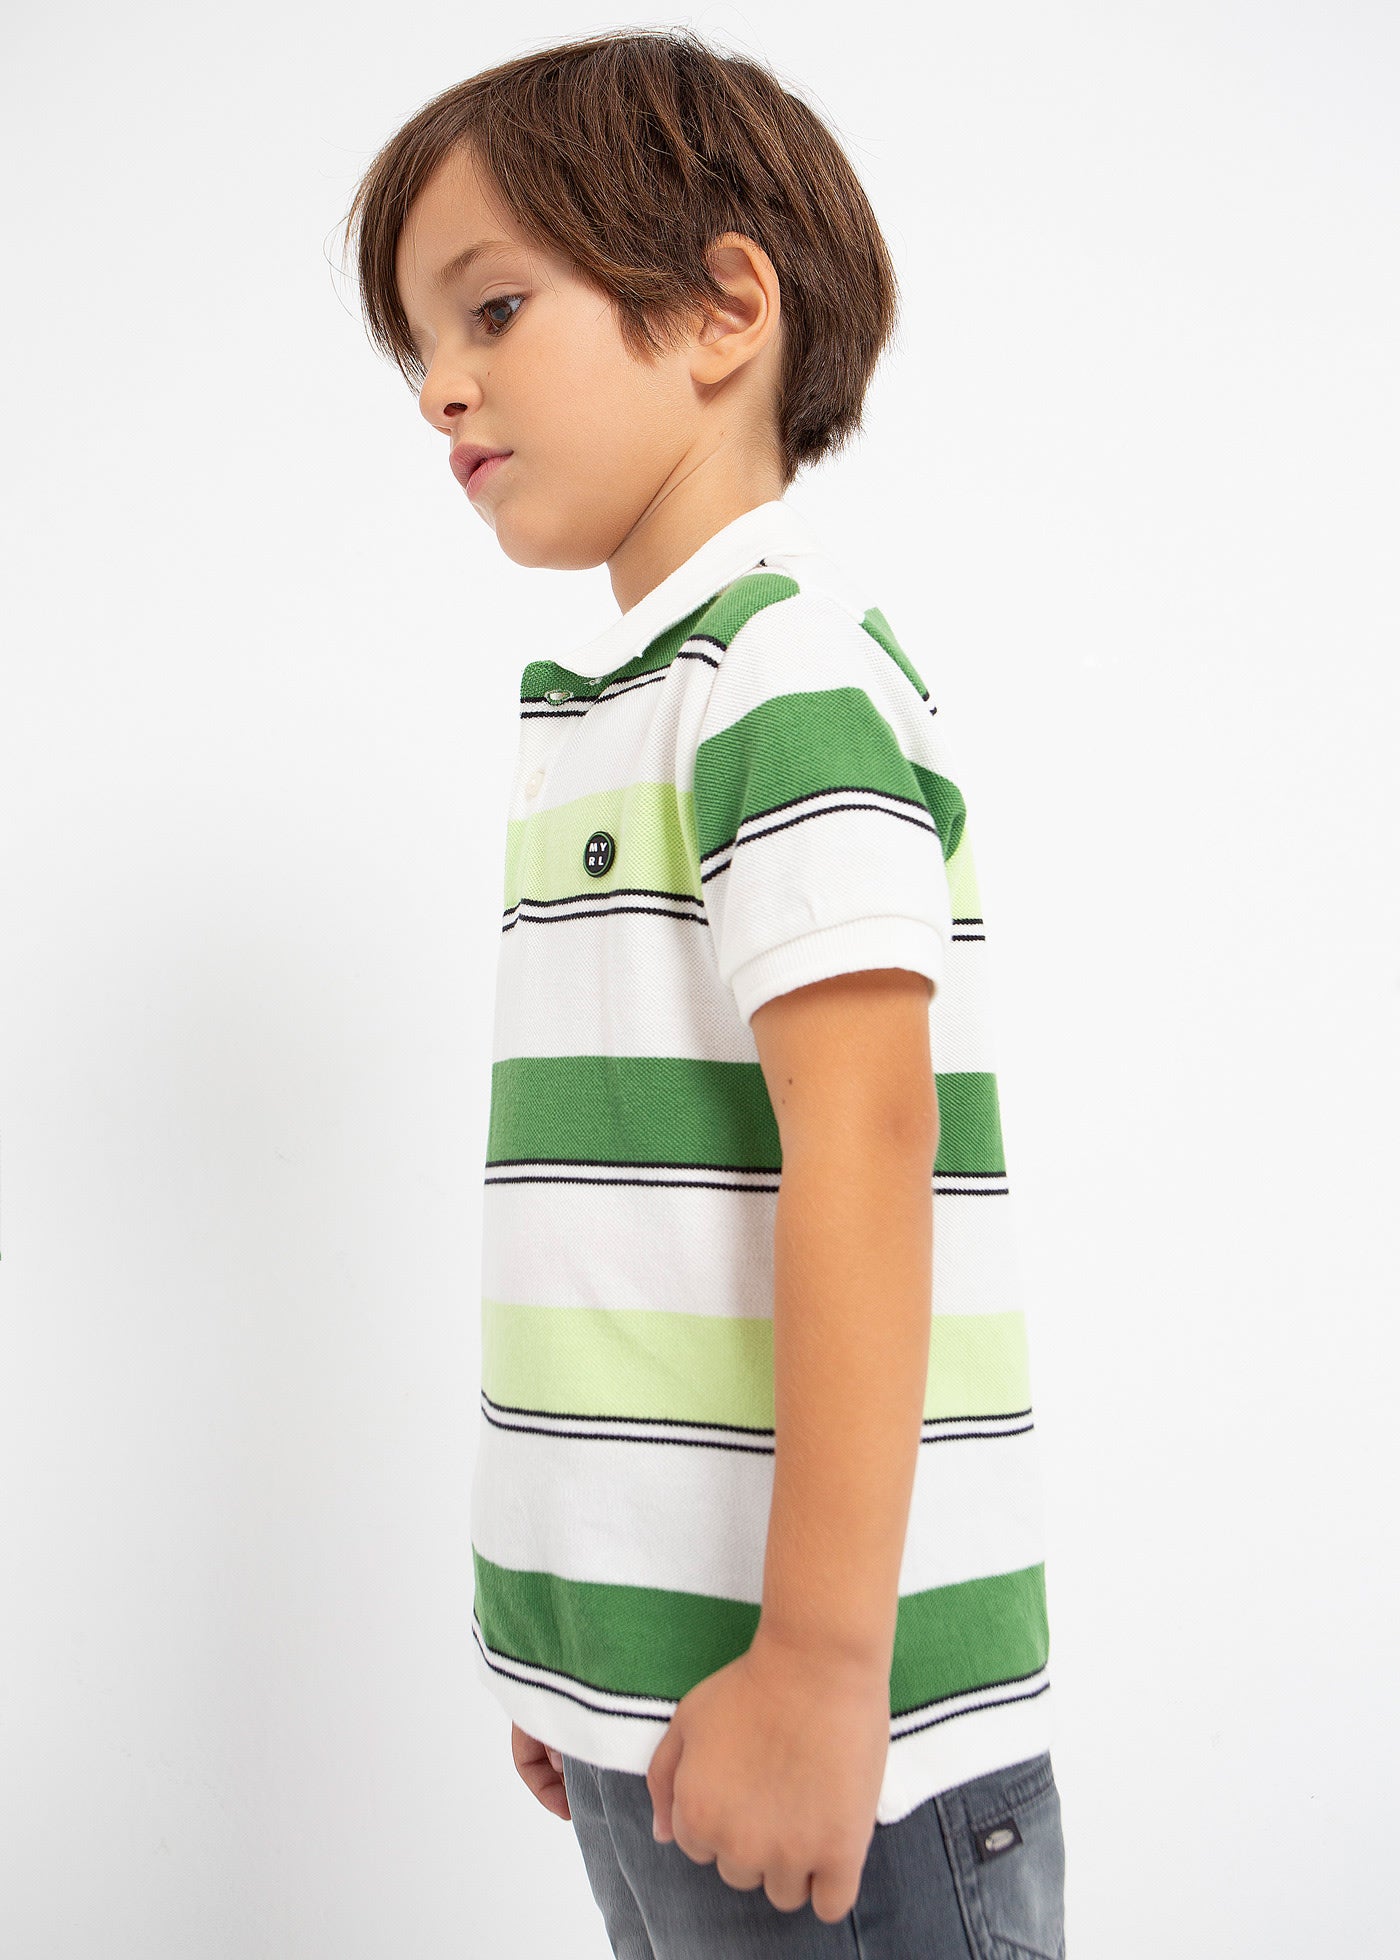 White and Green Striped SS Polo Shirt